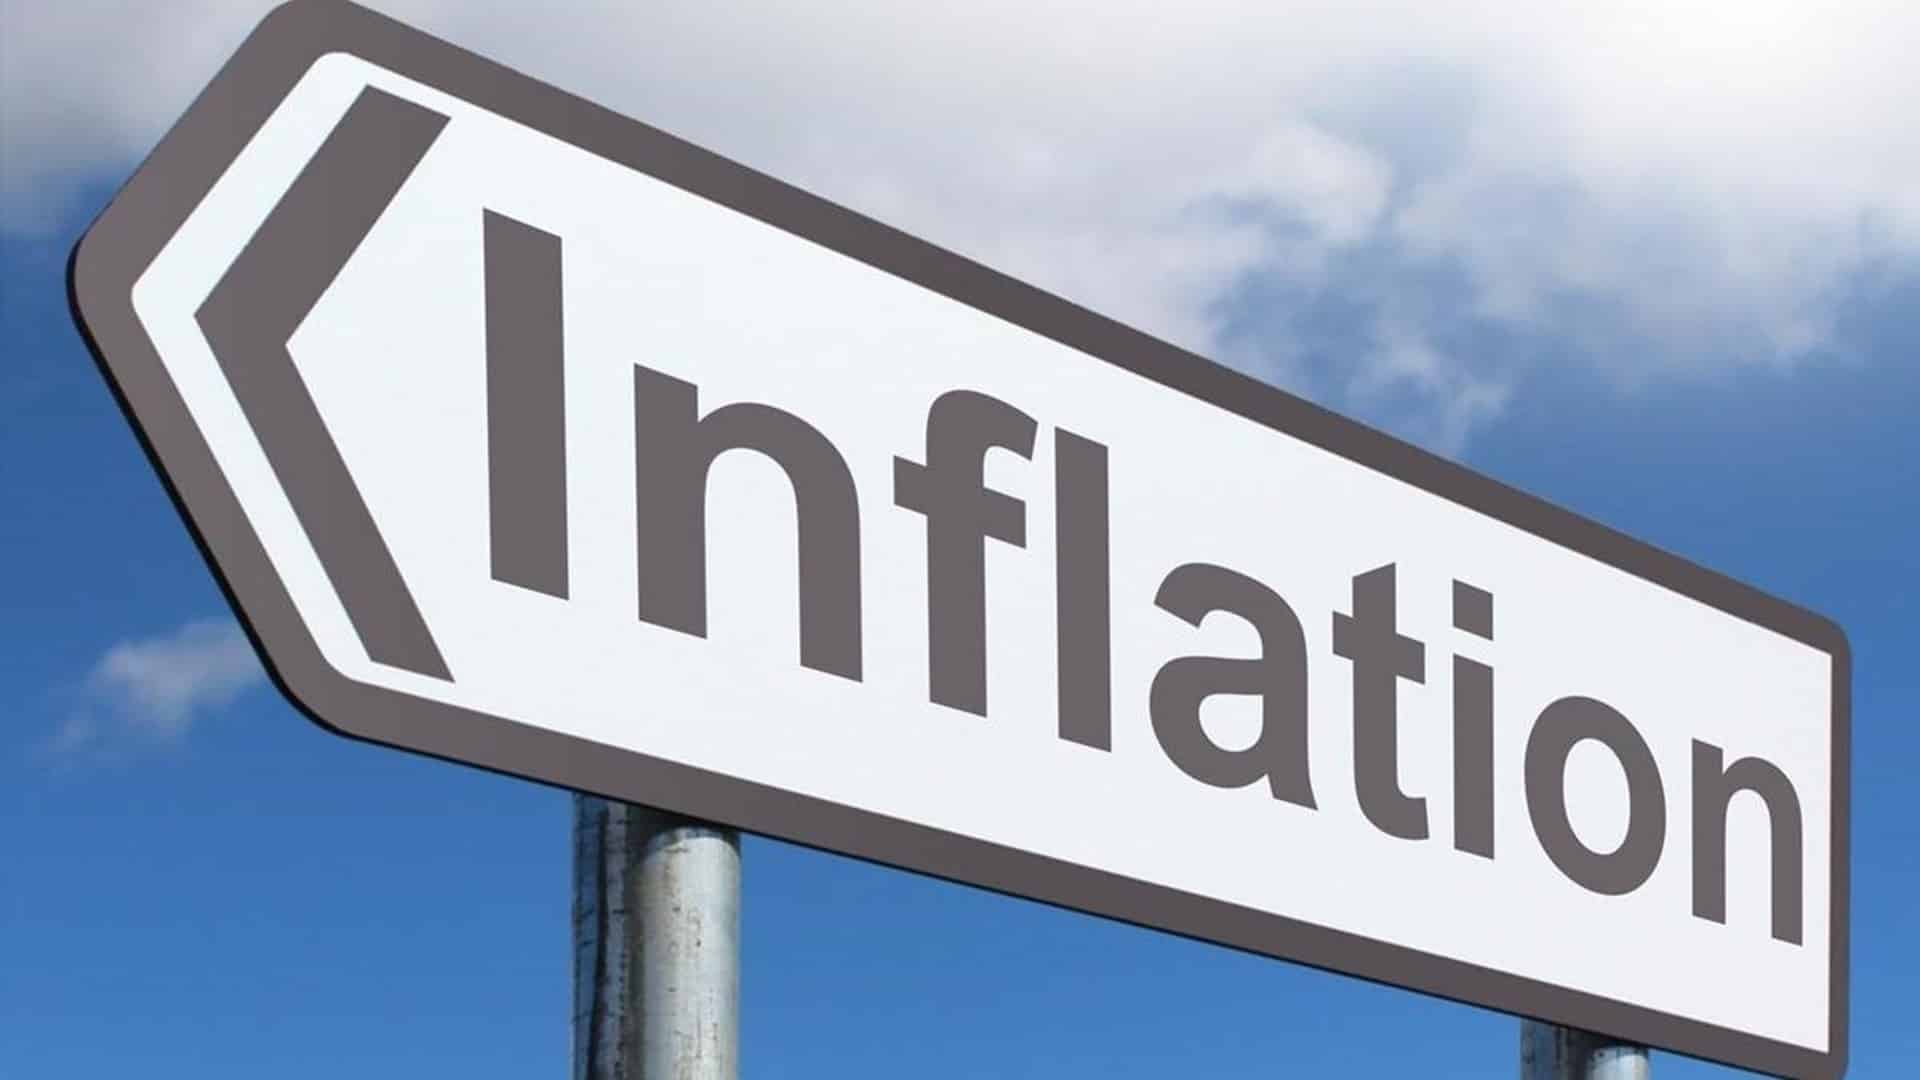 Wholesale price-based inflation spikes to 14.55 per cent in March: Govt data